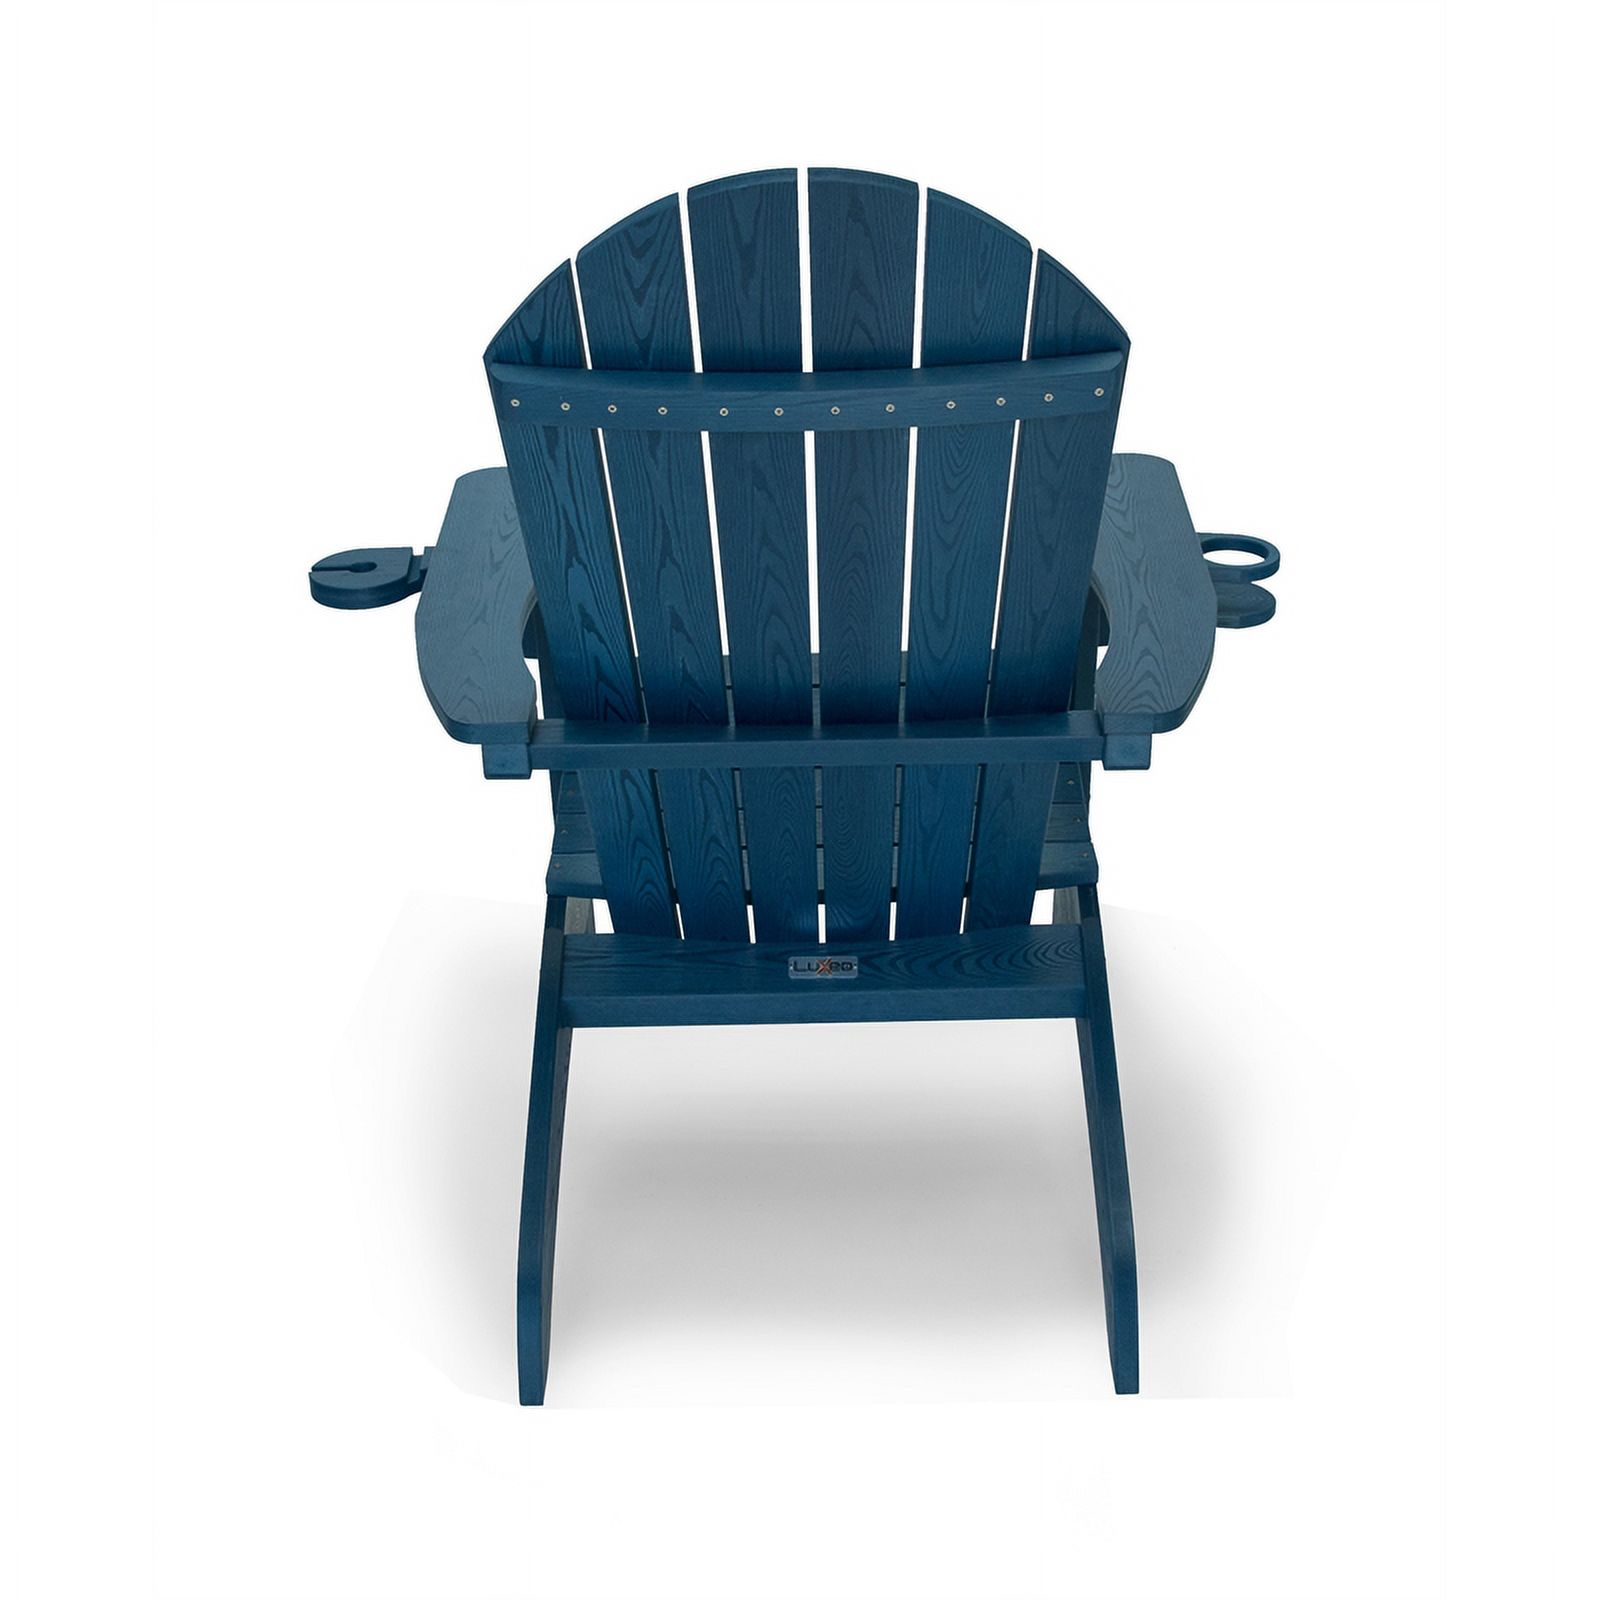 Westwood Navy All Weather Outdoor Patio Adirondack Chair - image 5 of 11